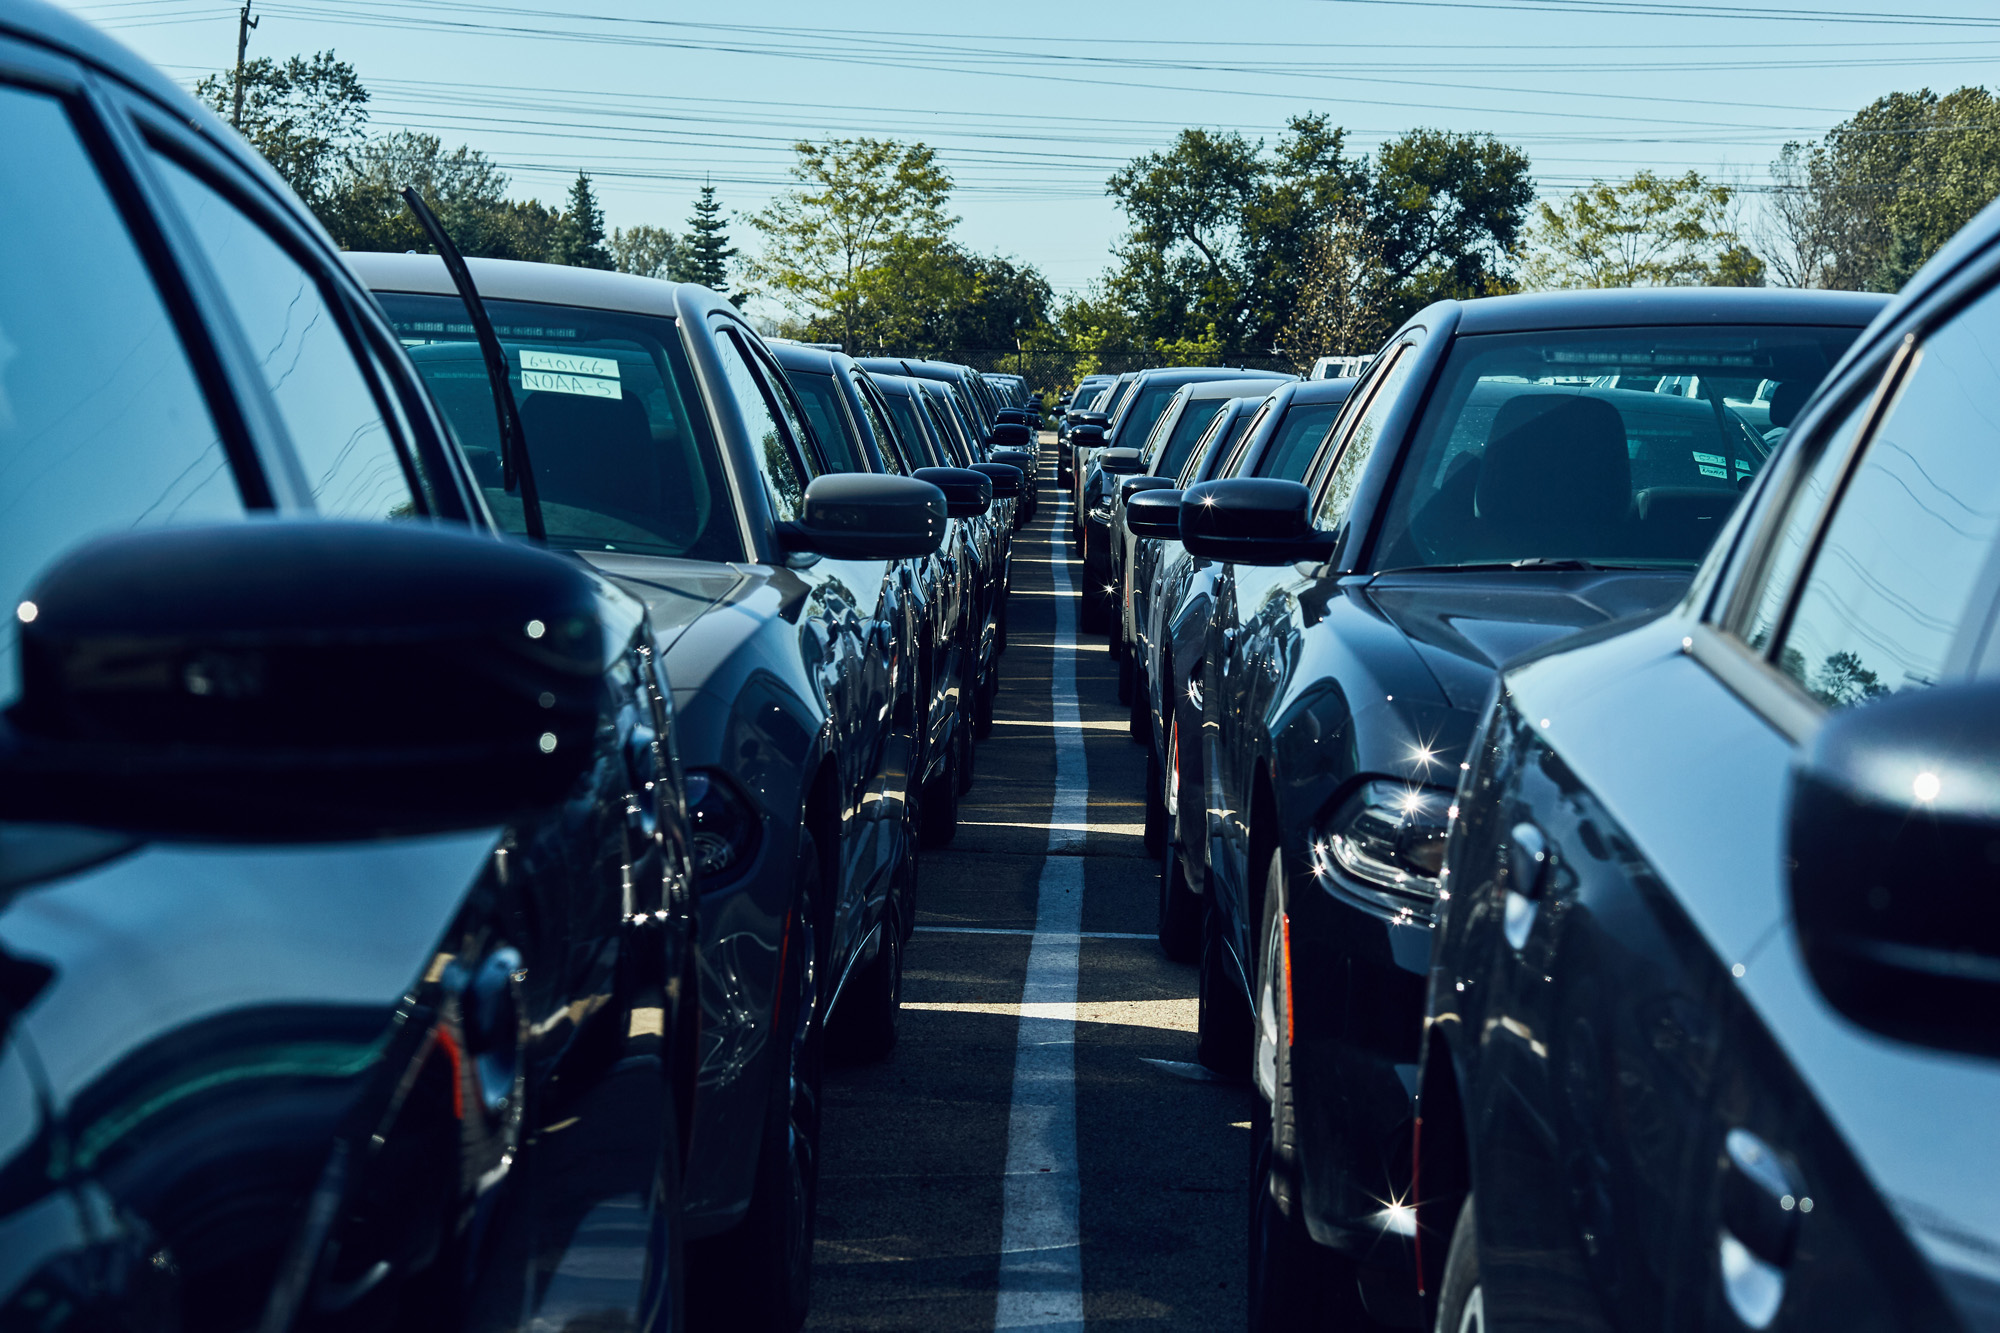 Cars parked in line